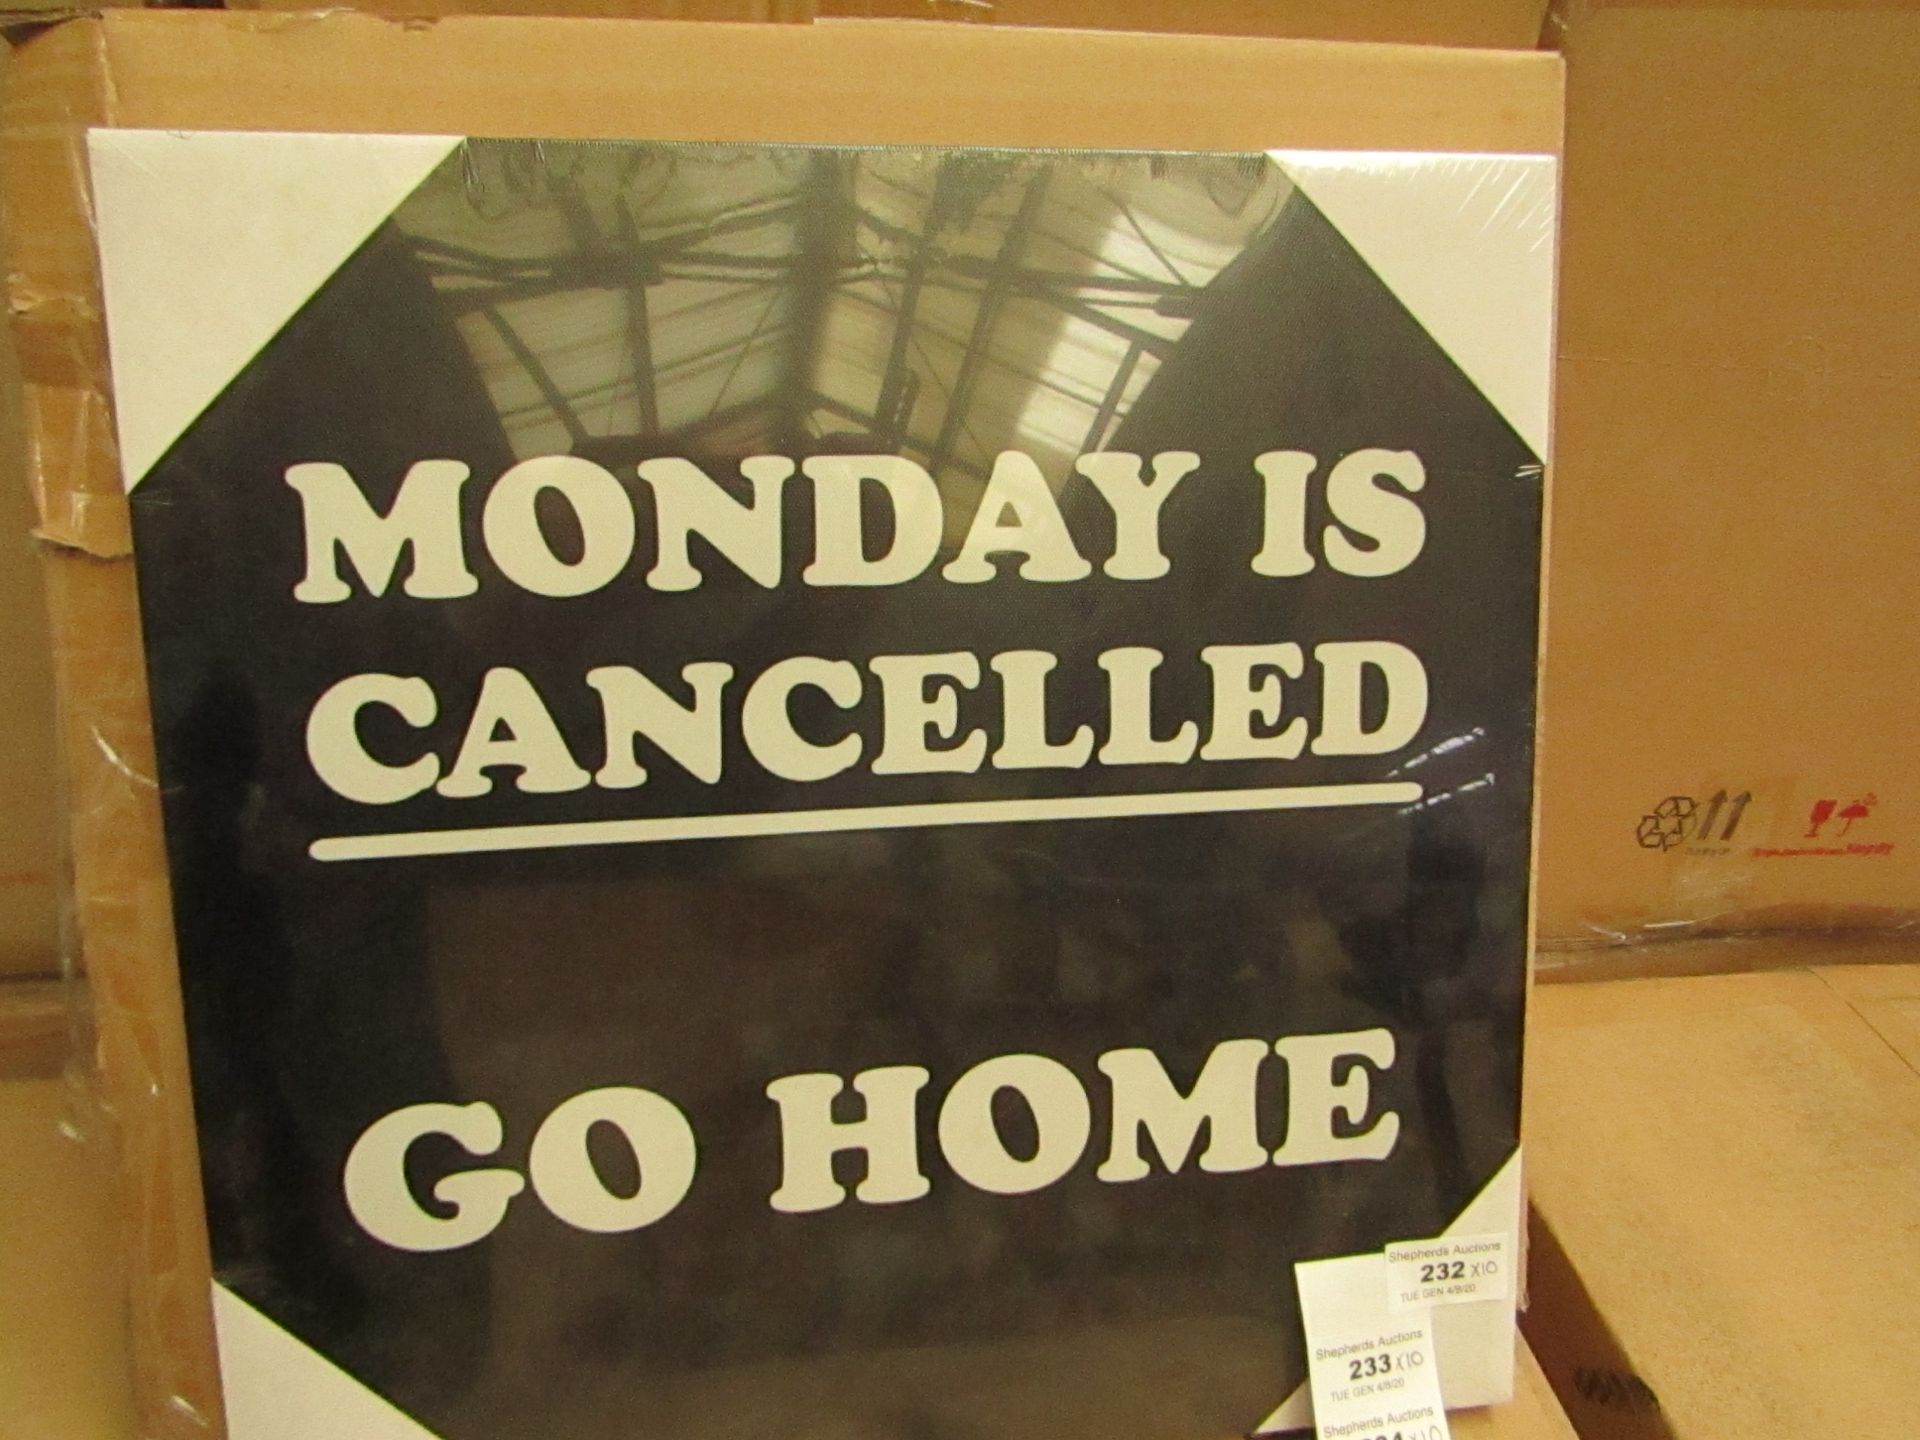 10x "Monday is Cancelled Go Home" Canvas's (36x36cm) - Packaged & Boxed.